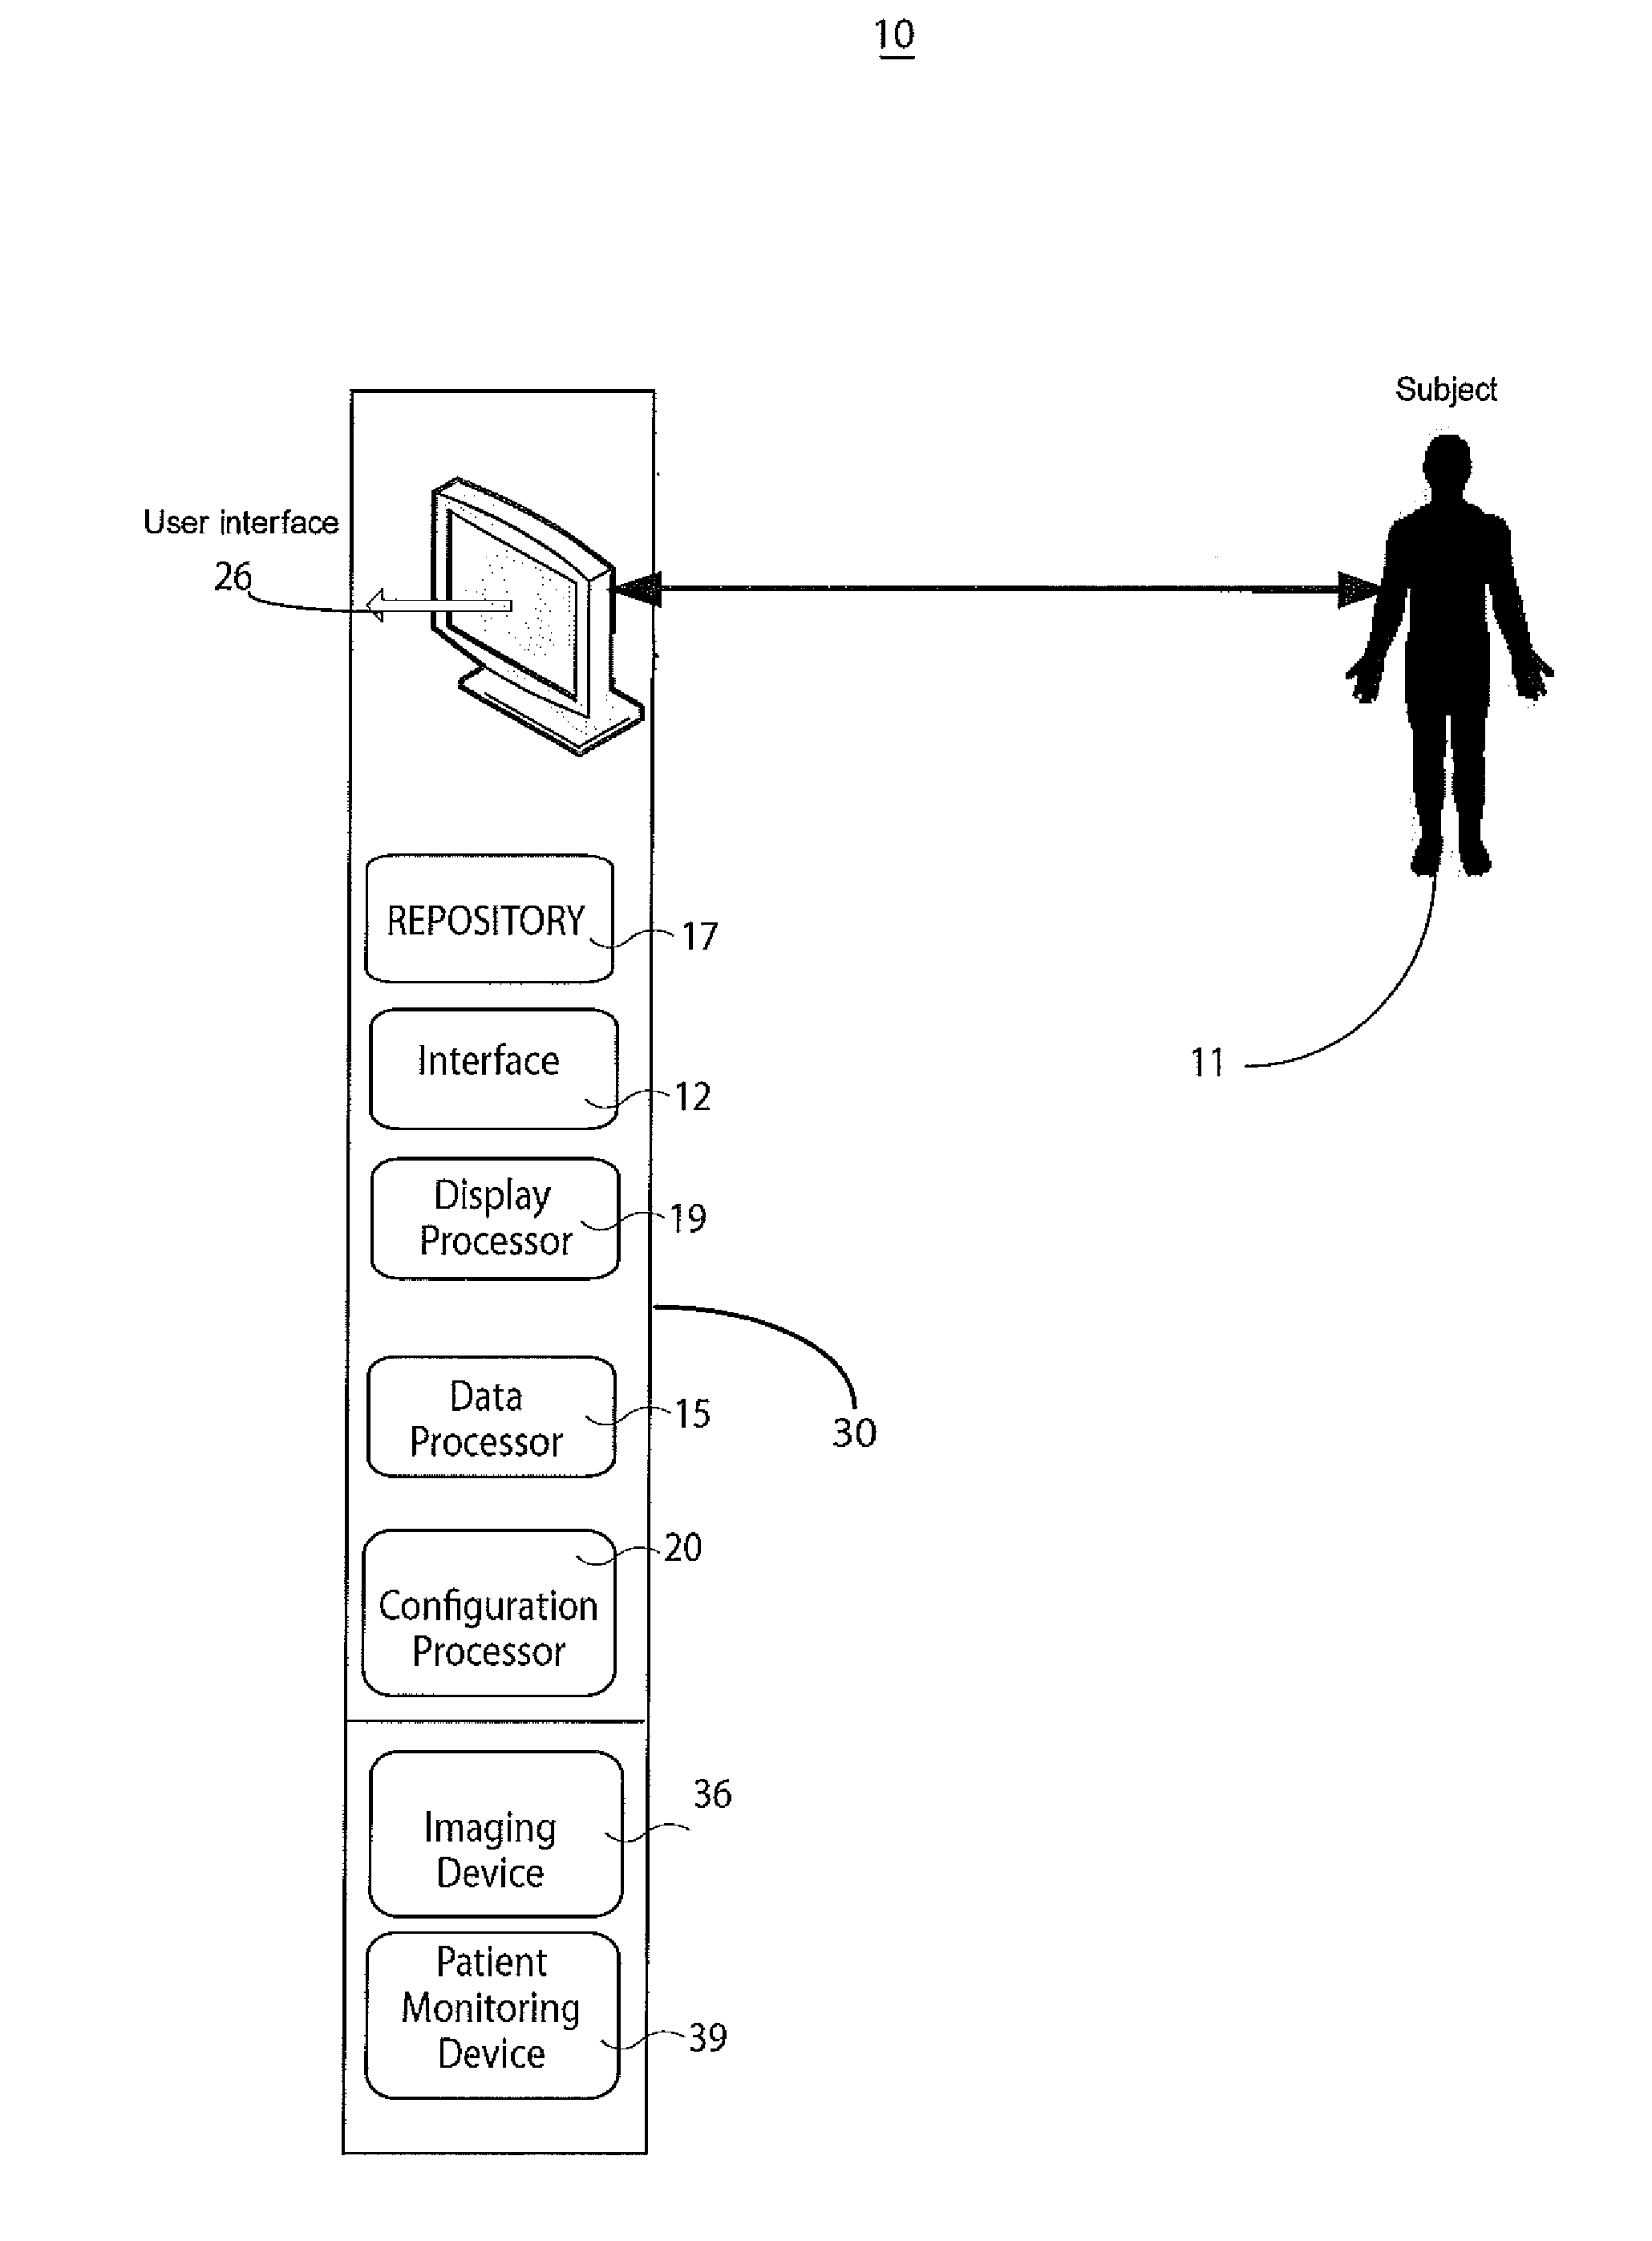 System for Monitoring and Visualizing a Patient Treatment Process